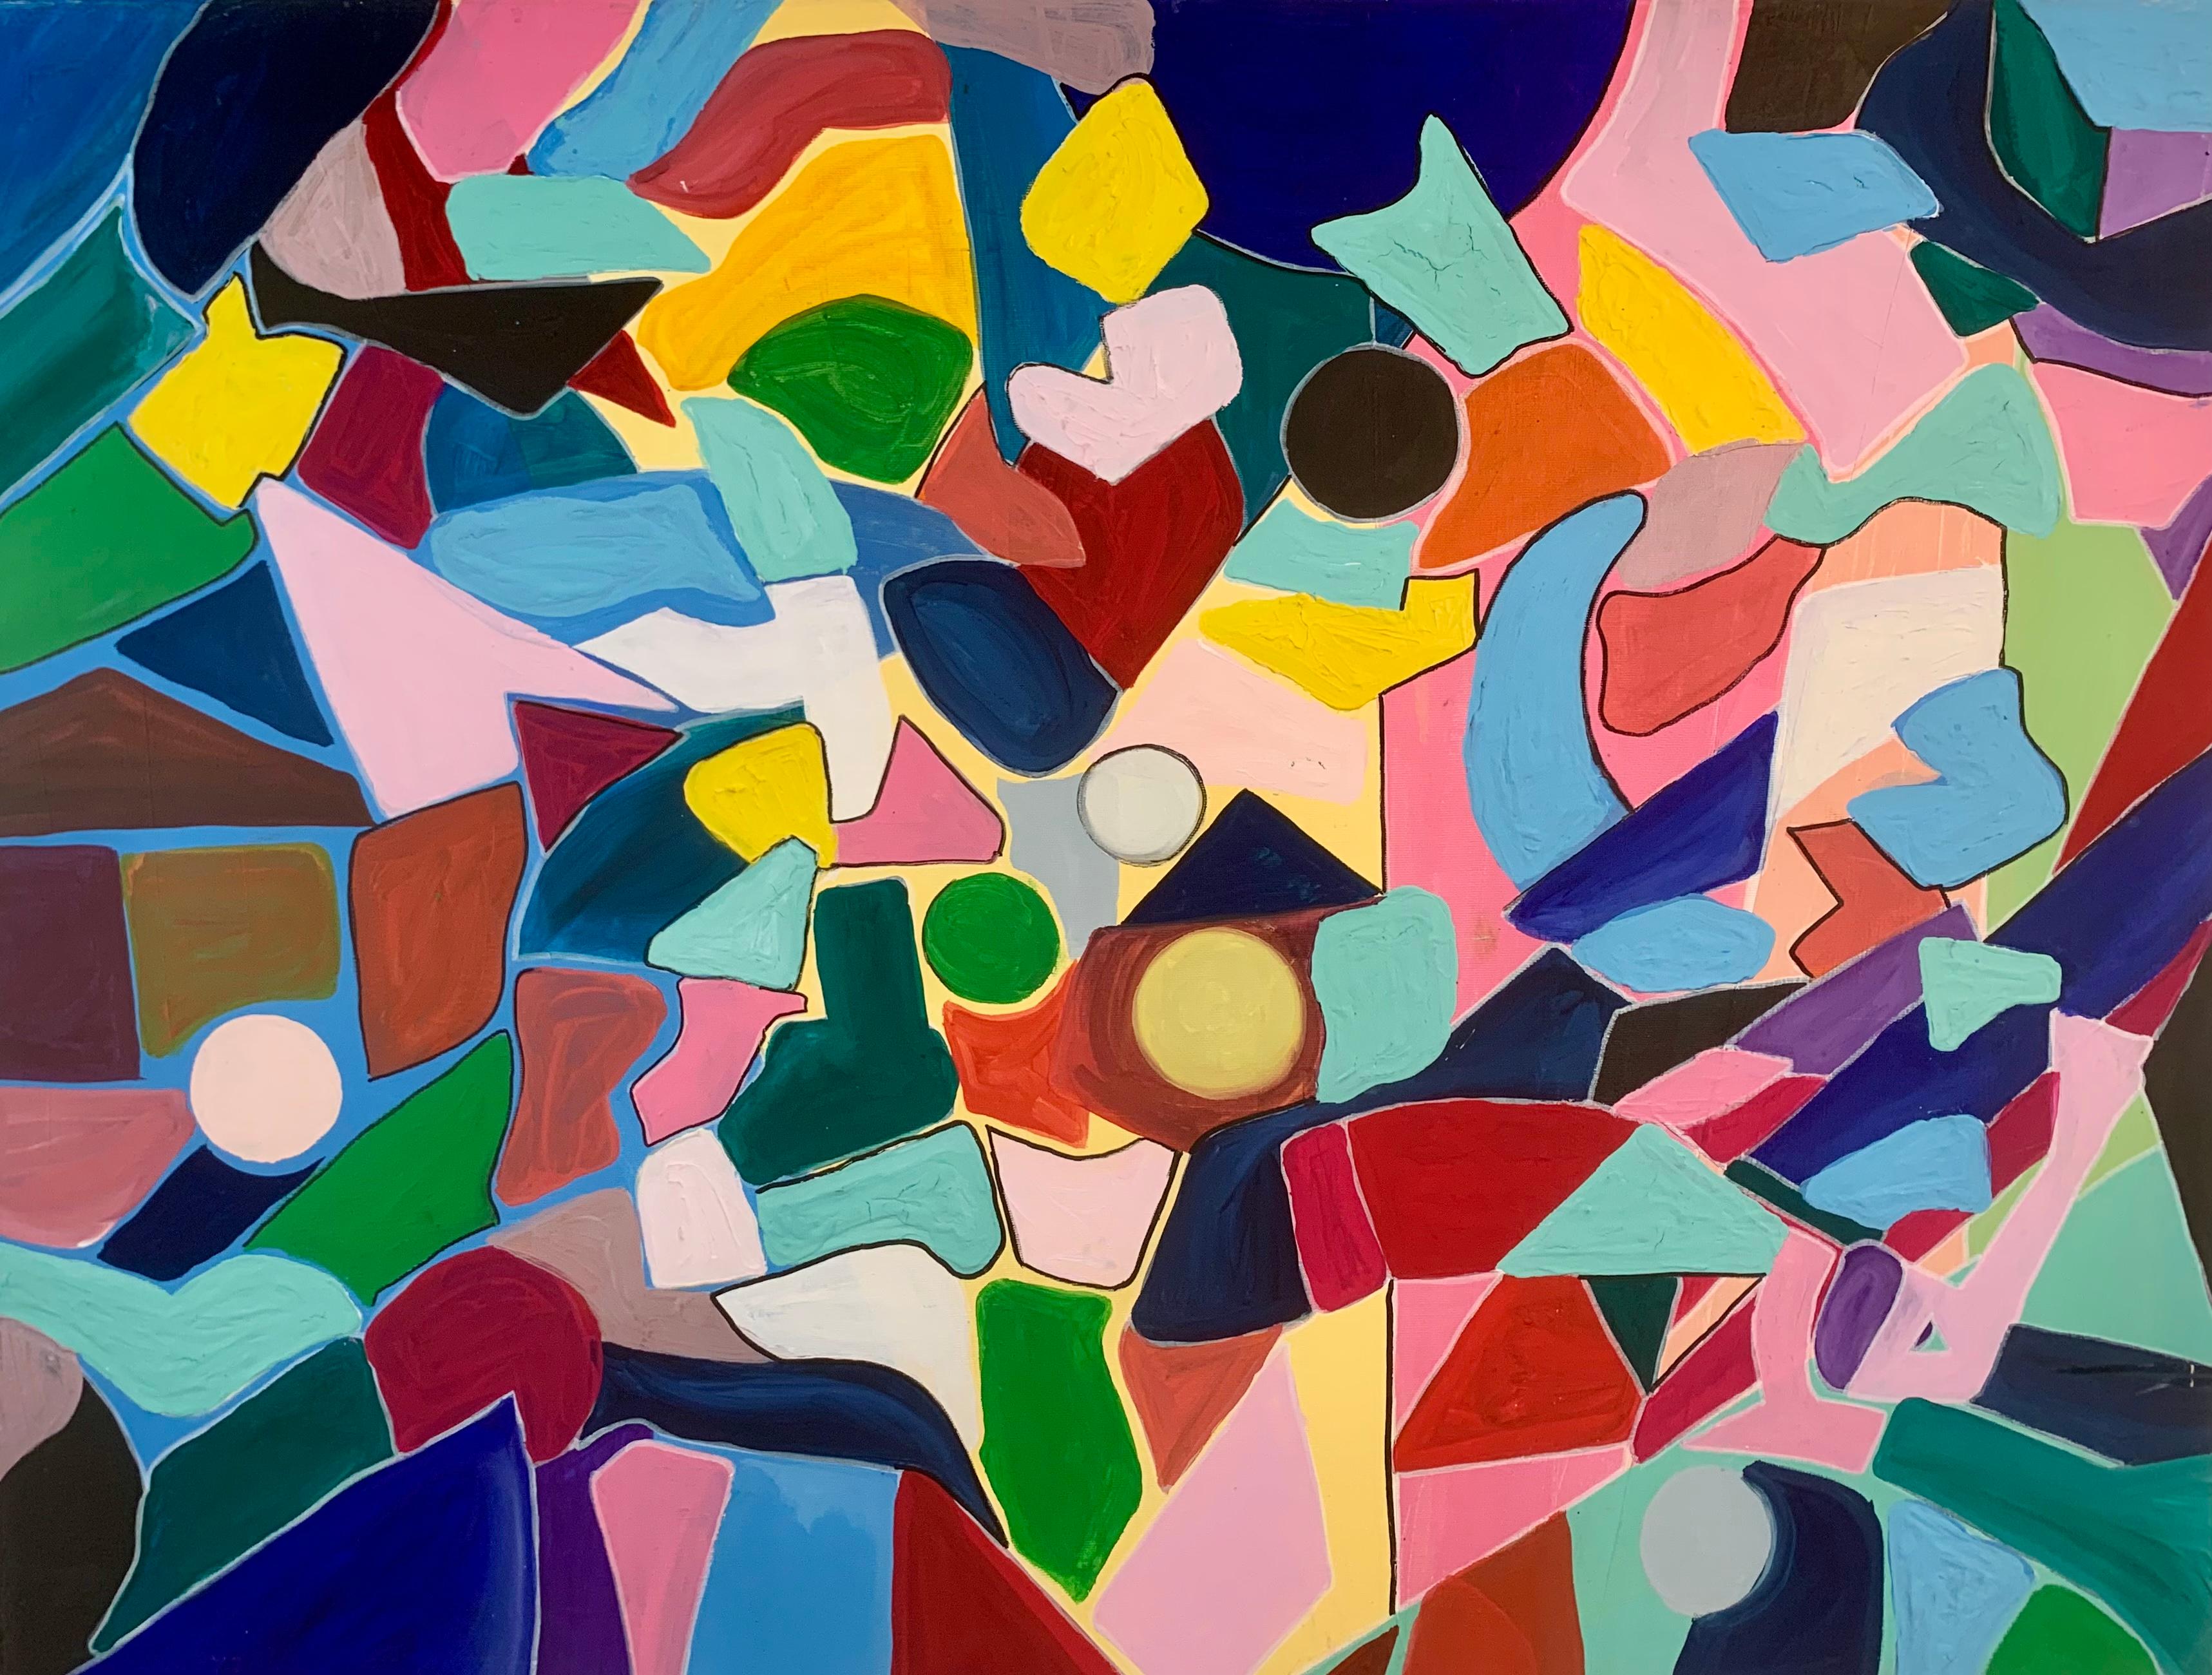 Missing Puzzle Piece by K. Husslein - geometric colorful abstract painting  - Painting by Katharina Husslein